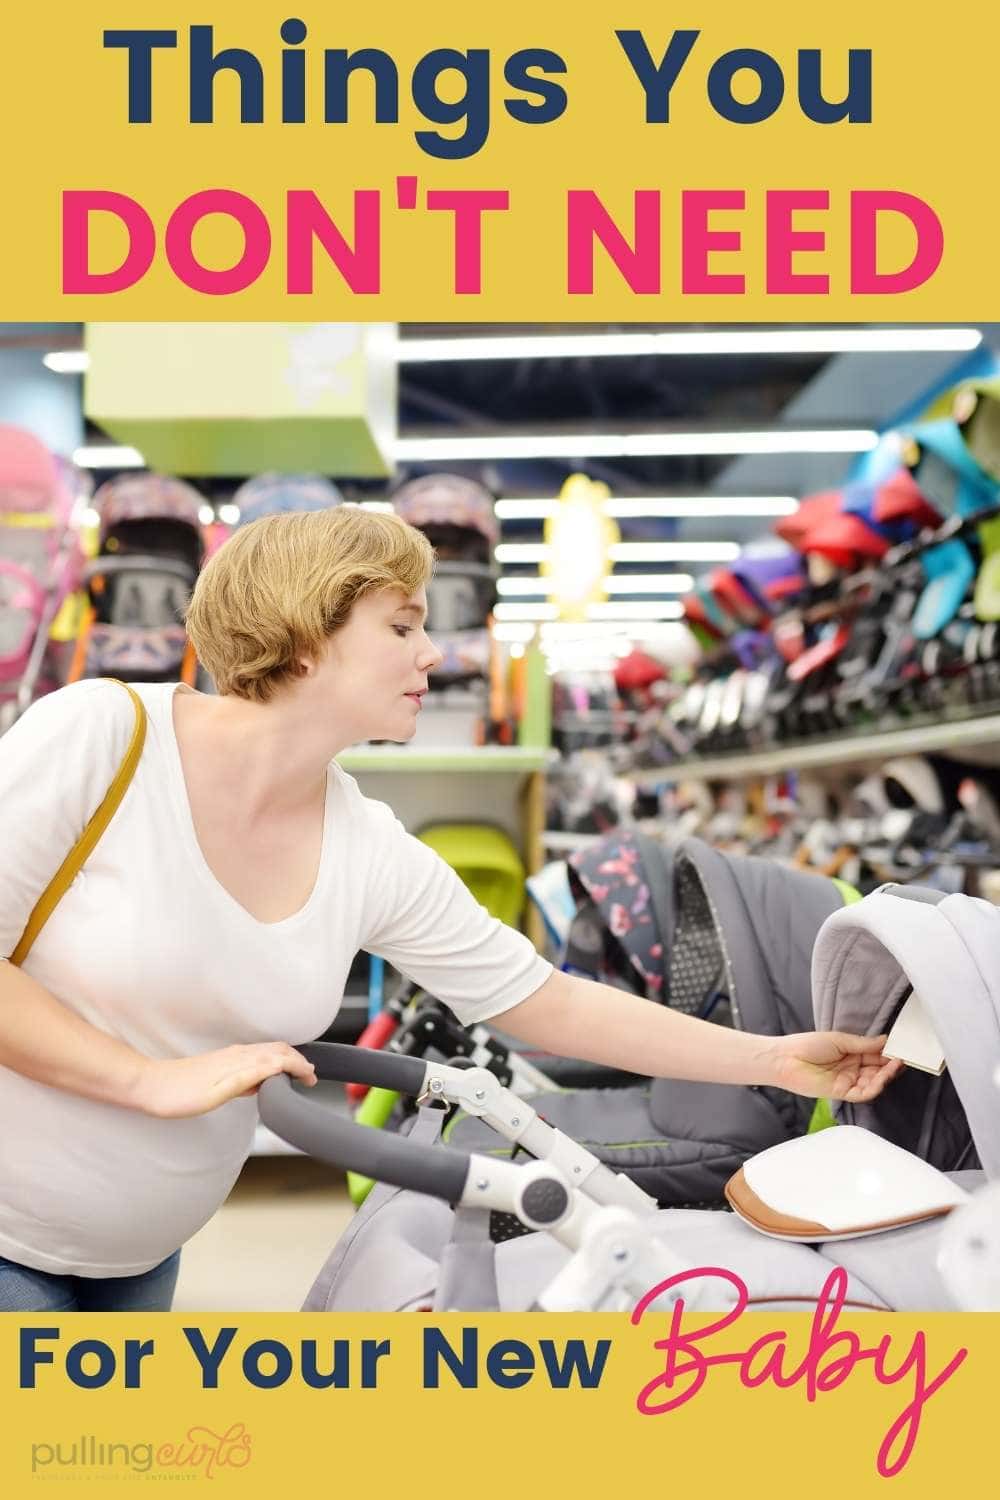 Things you do NOT need for your new baby! via @pullingcurls